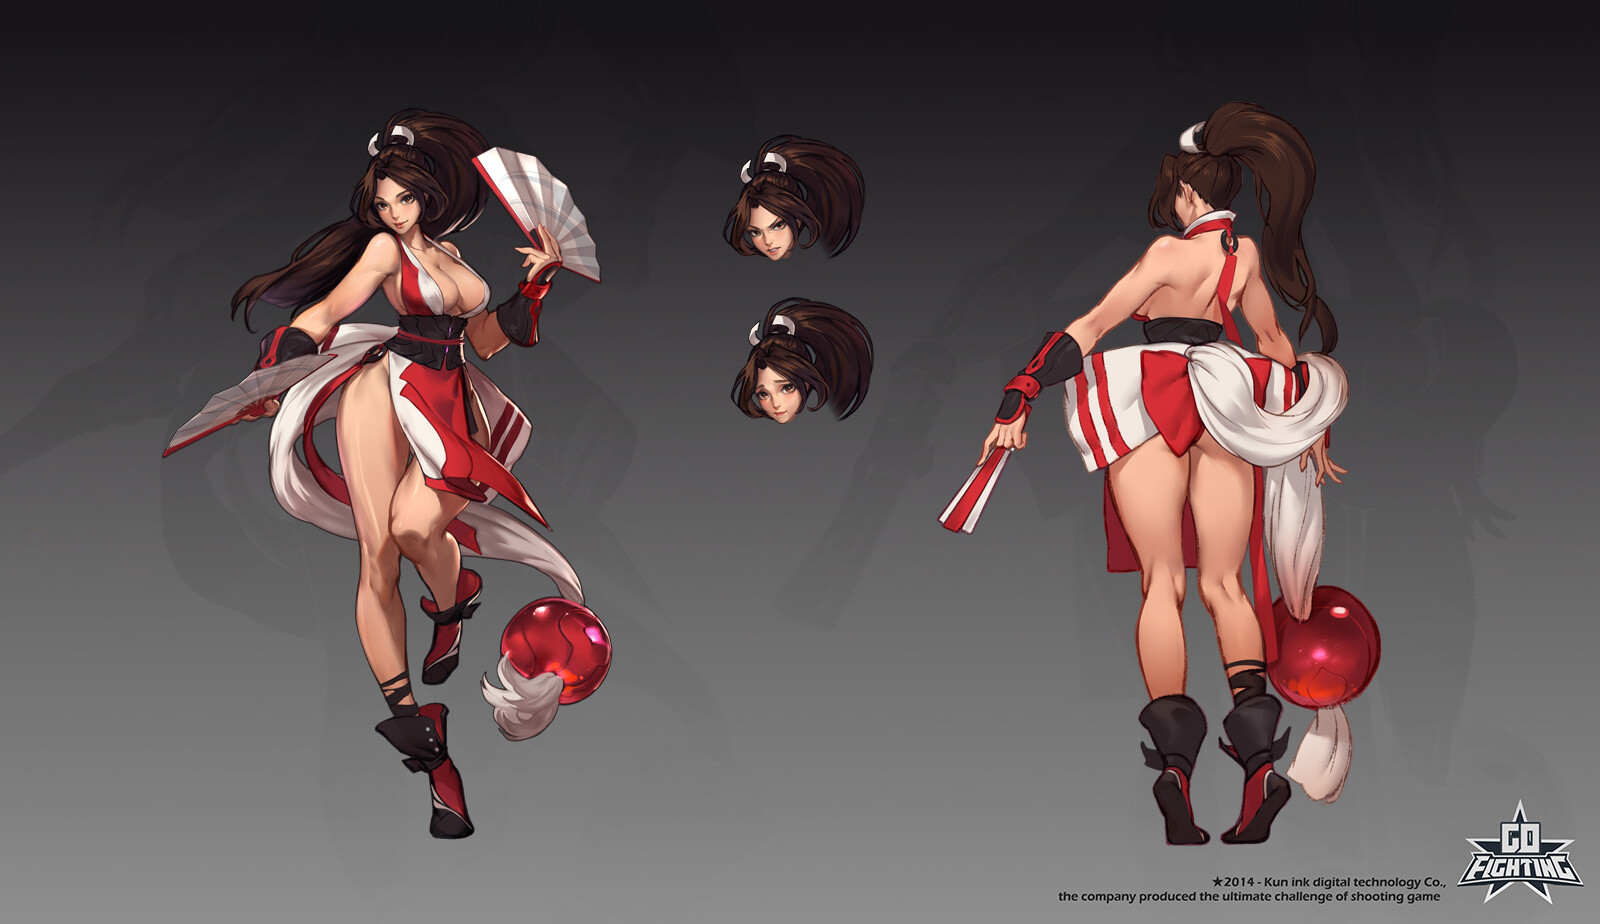 General 1600x924 Mai Shiranui King of Fighters video games minimalism video game girls fans simple background big boobs thighs legs ponytail